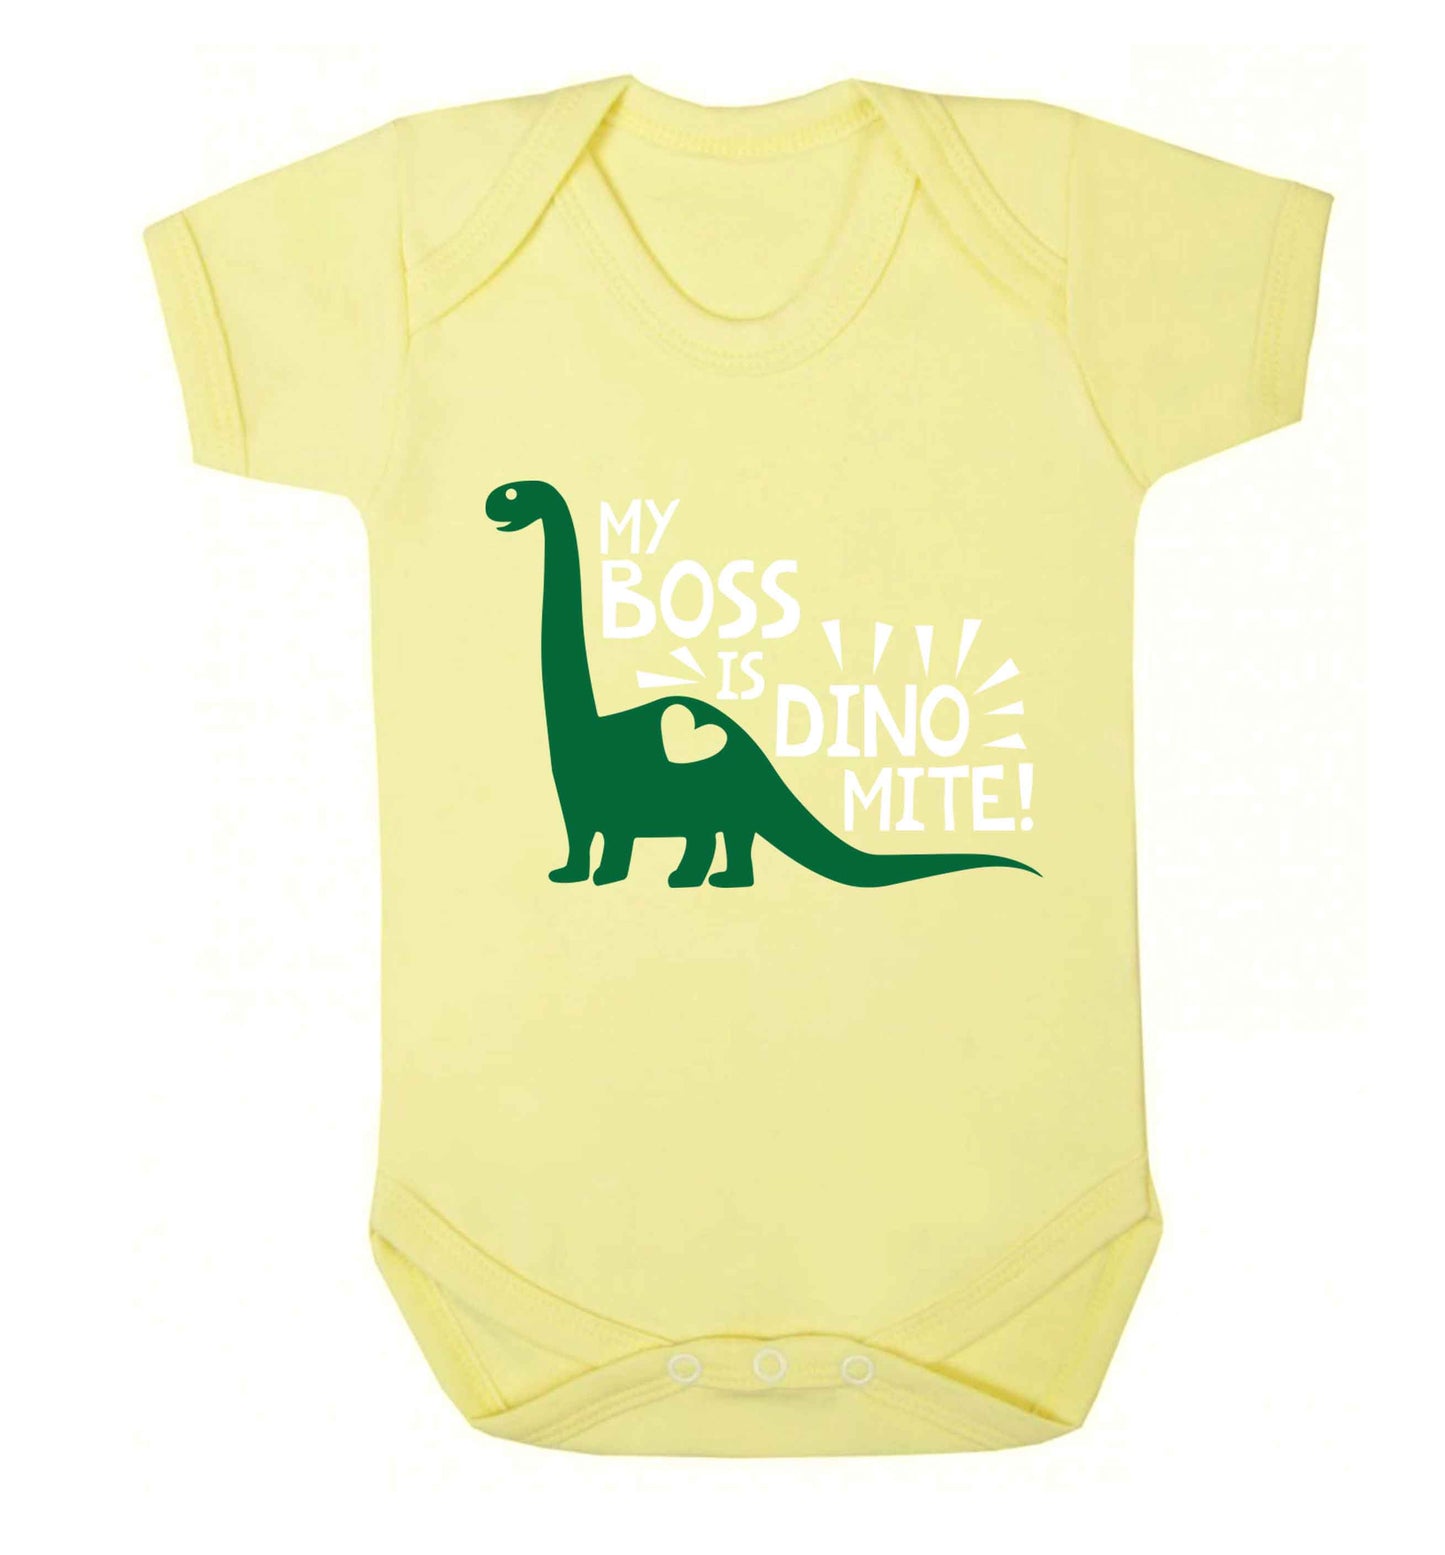 My boss is dinomite! Baby Vest pale yellow 18-24 months